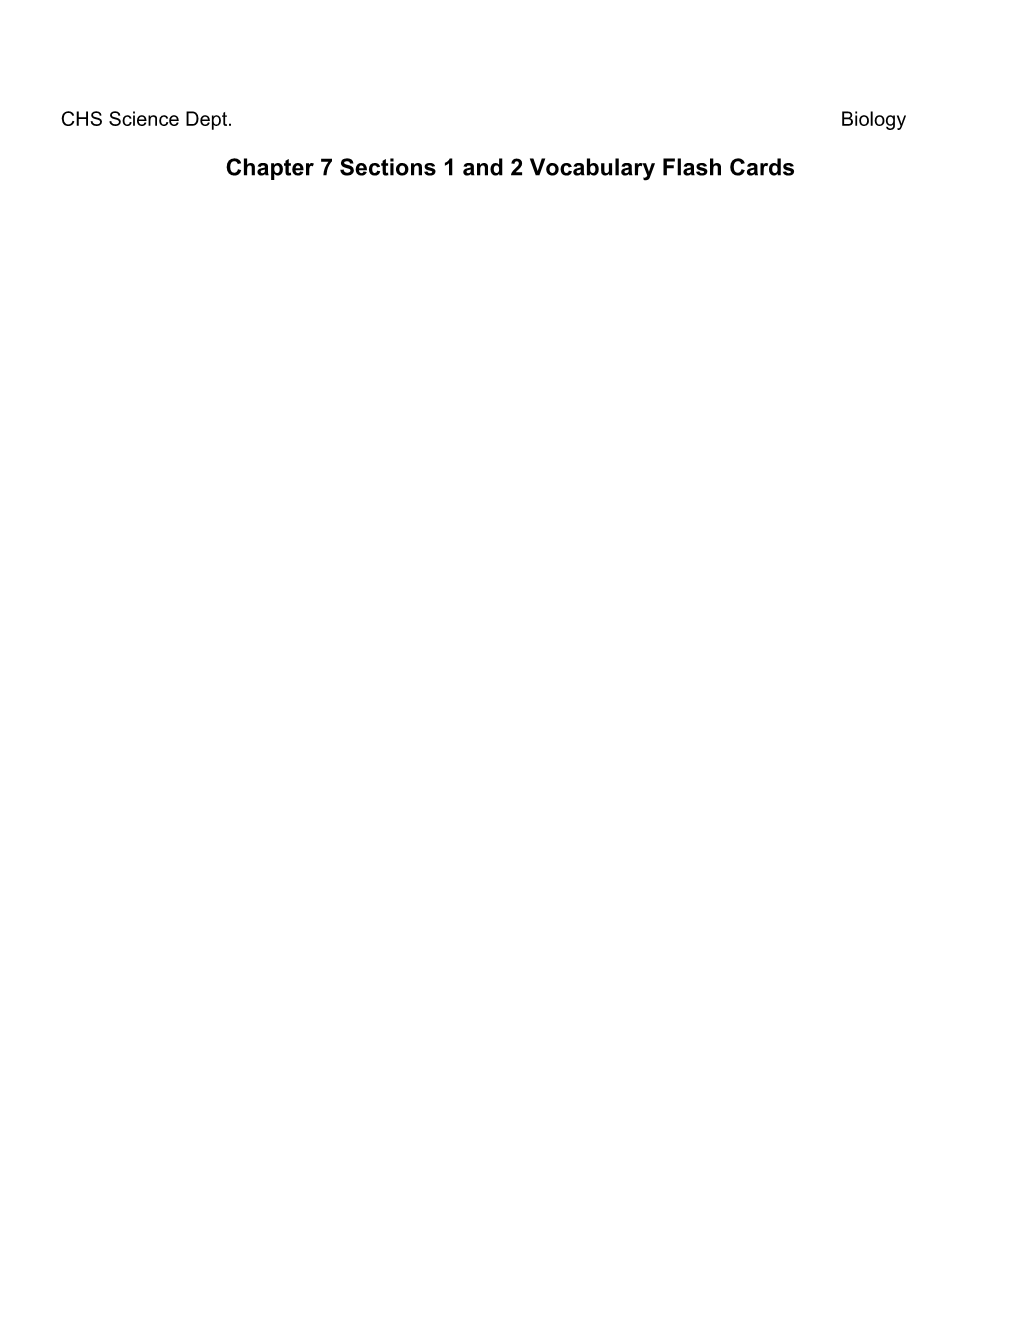 Chapter 7 Sections 1 and 2 Vocabulary Flash Cards